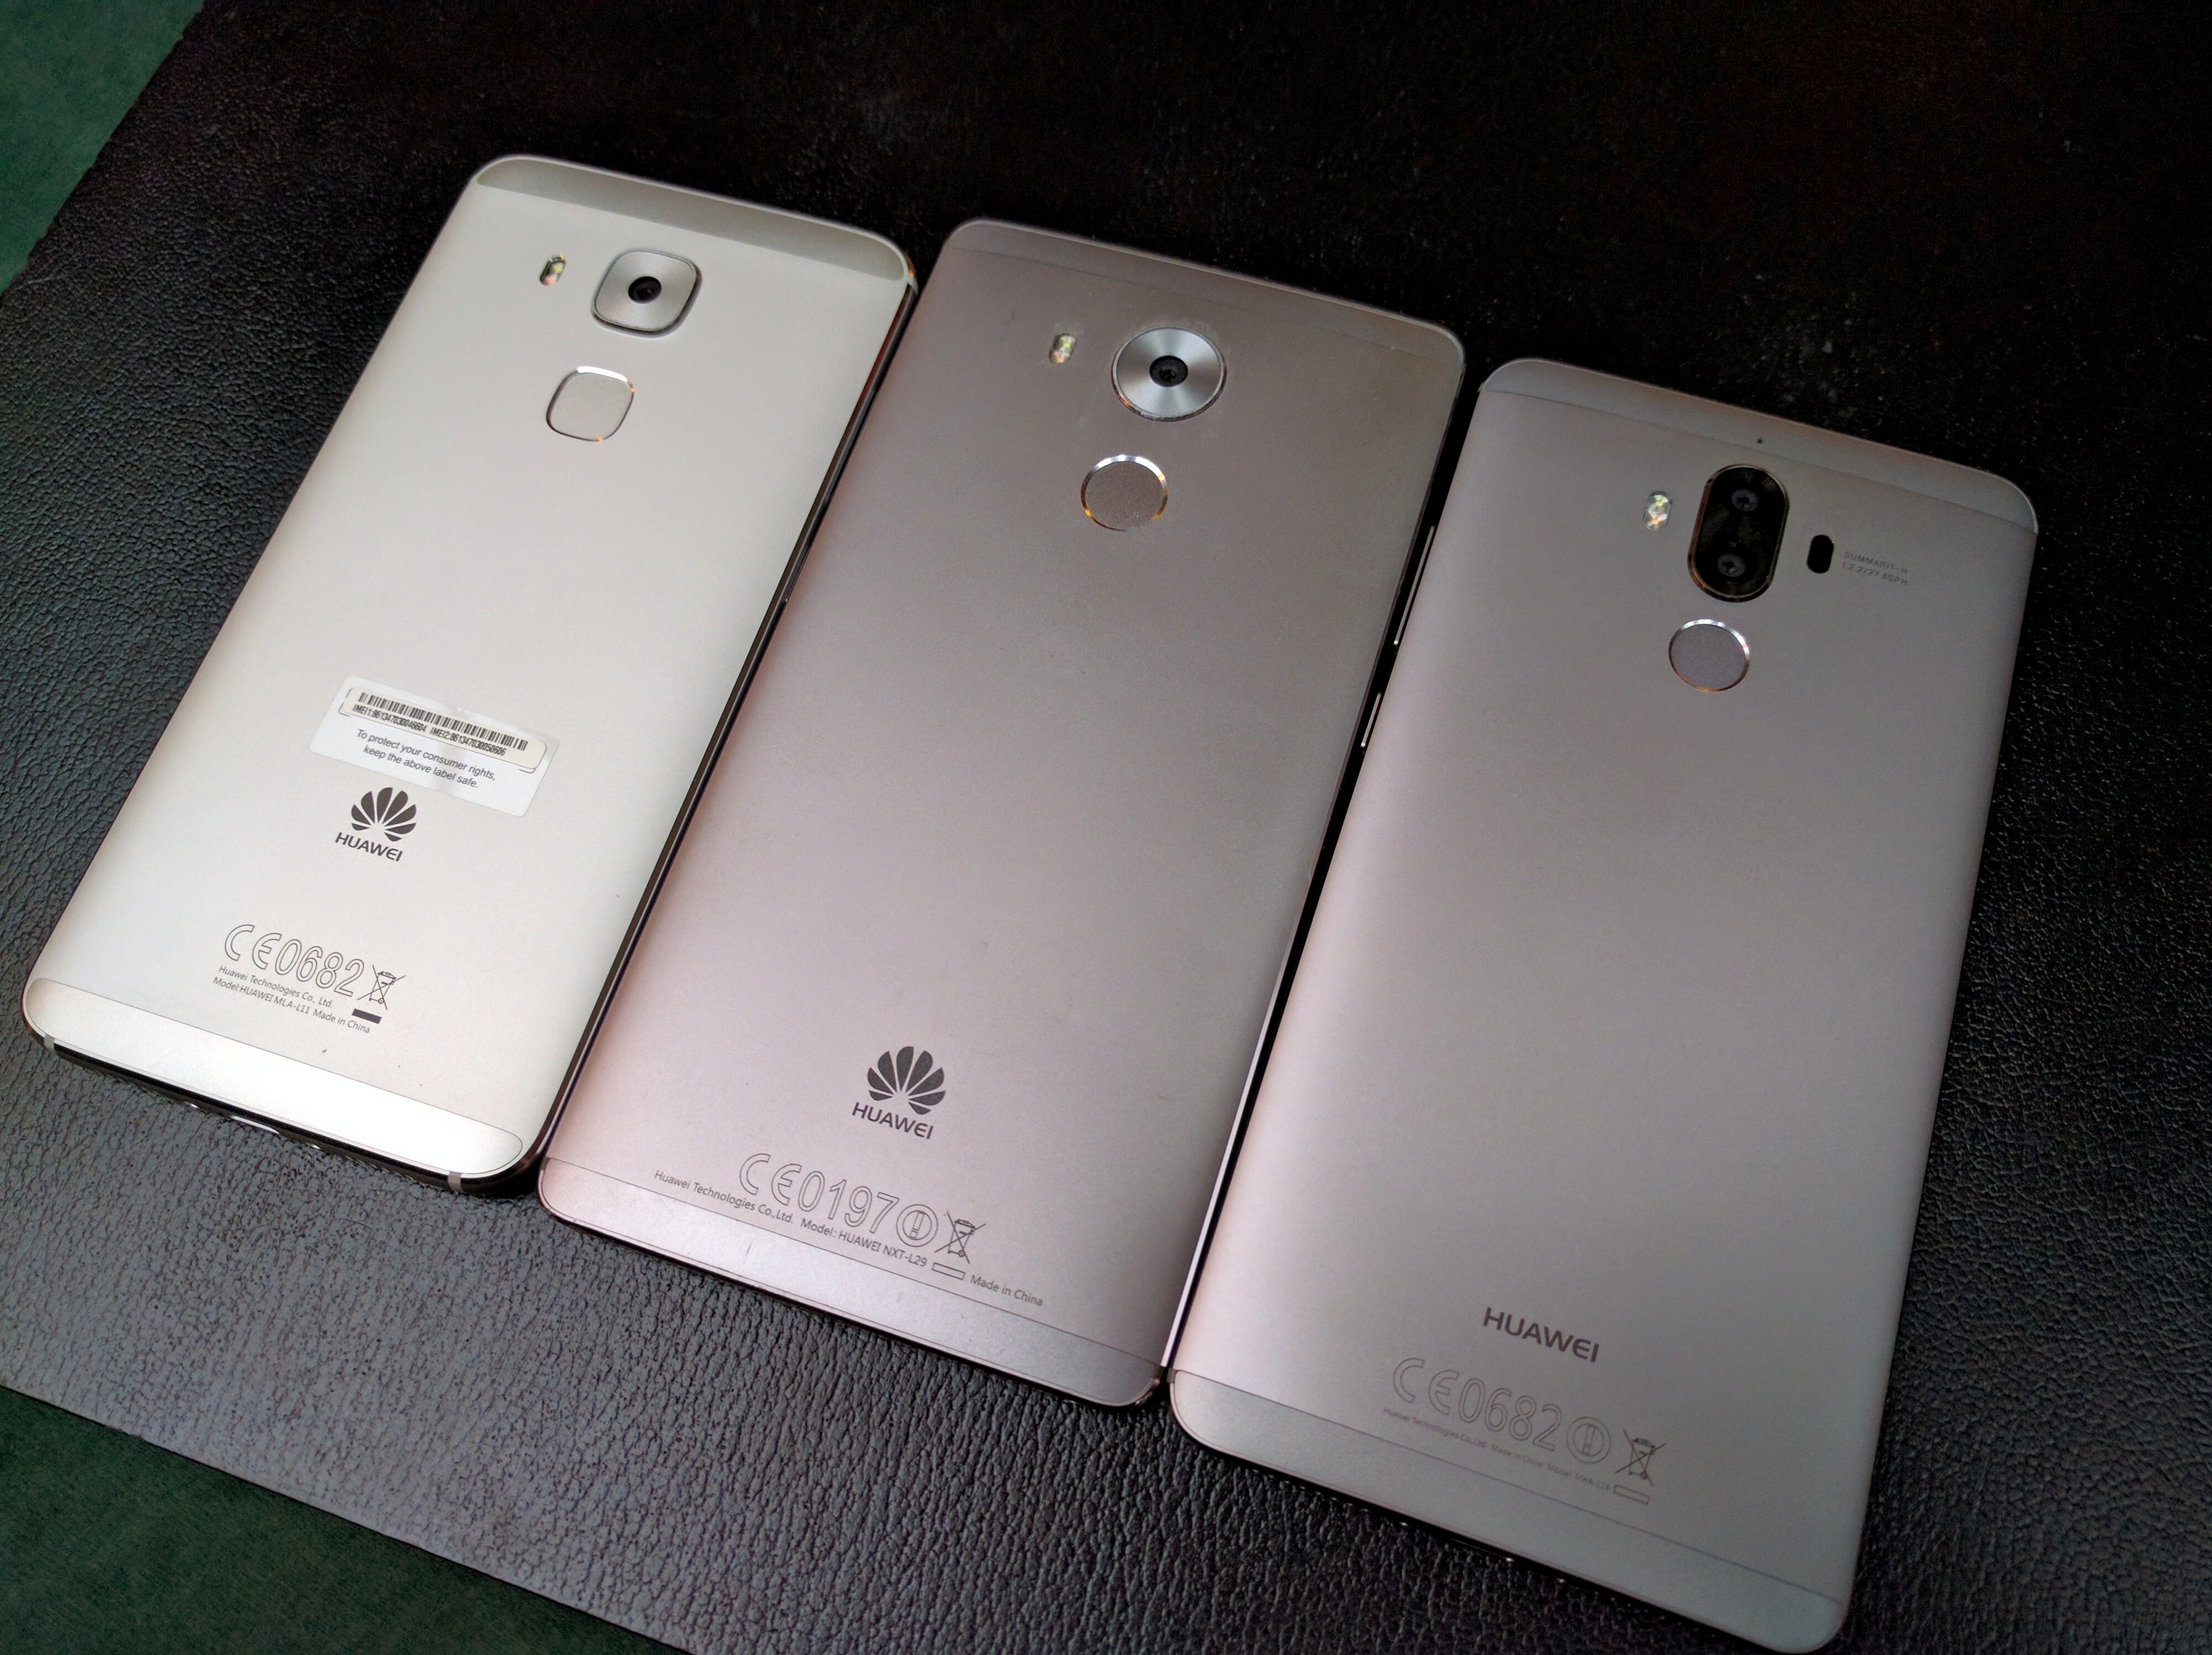 zoom Opsplitsen Touhou Huawei Mate 9 Launch and Hands On: Kirin 960, 5.9in FHD, Daydream VR